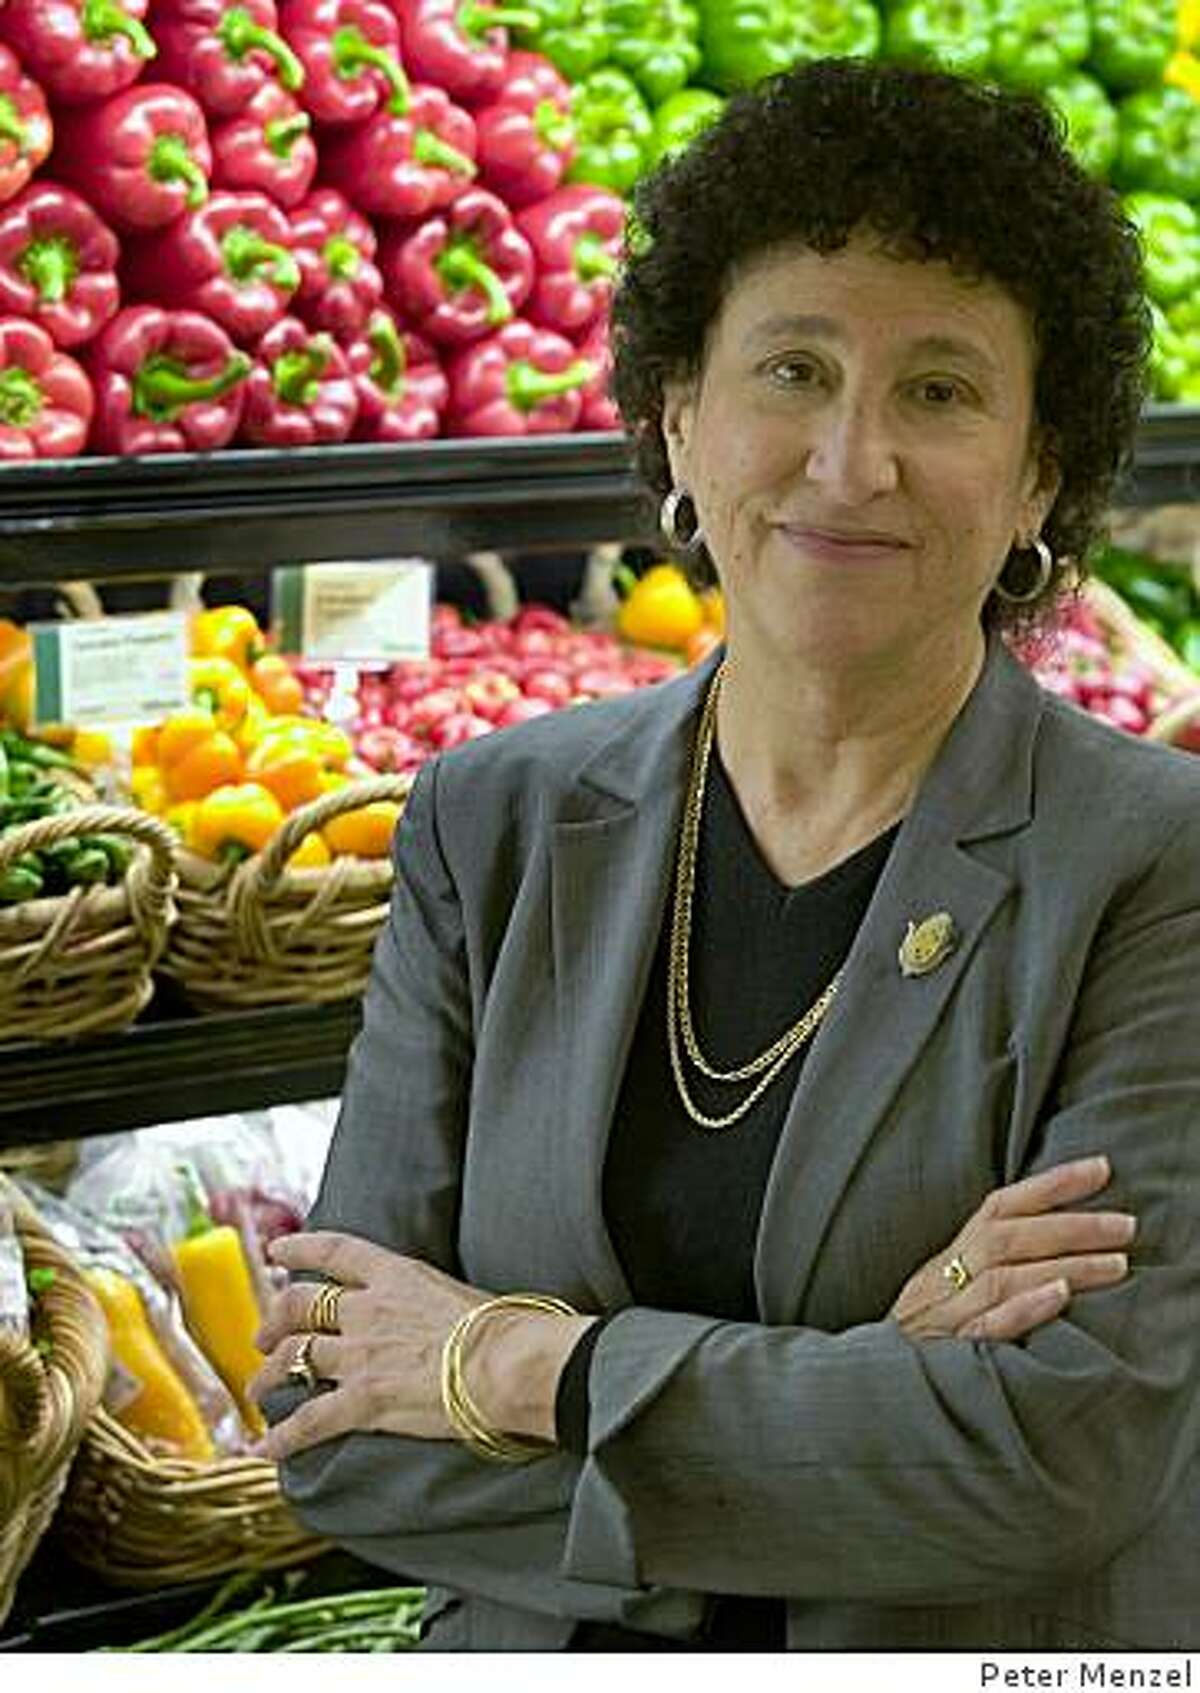 Marion Nestle, professor in the Department of Nutrition, Food Studies, and Public Health at New York University, author of "What to Eat'' and "Food Politics," and Chronicle Food columnist.